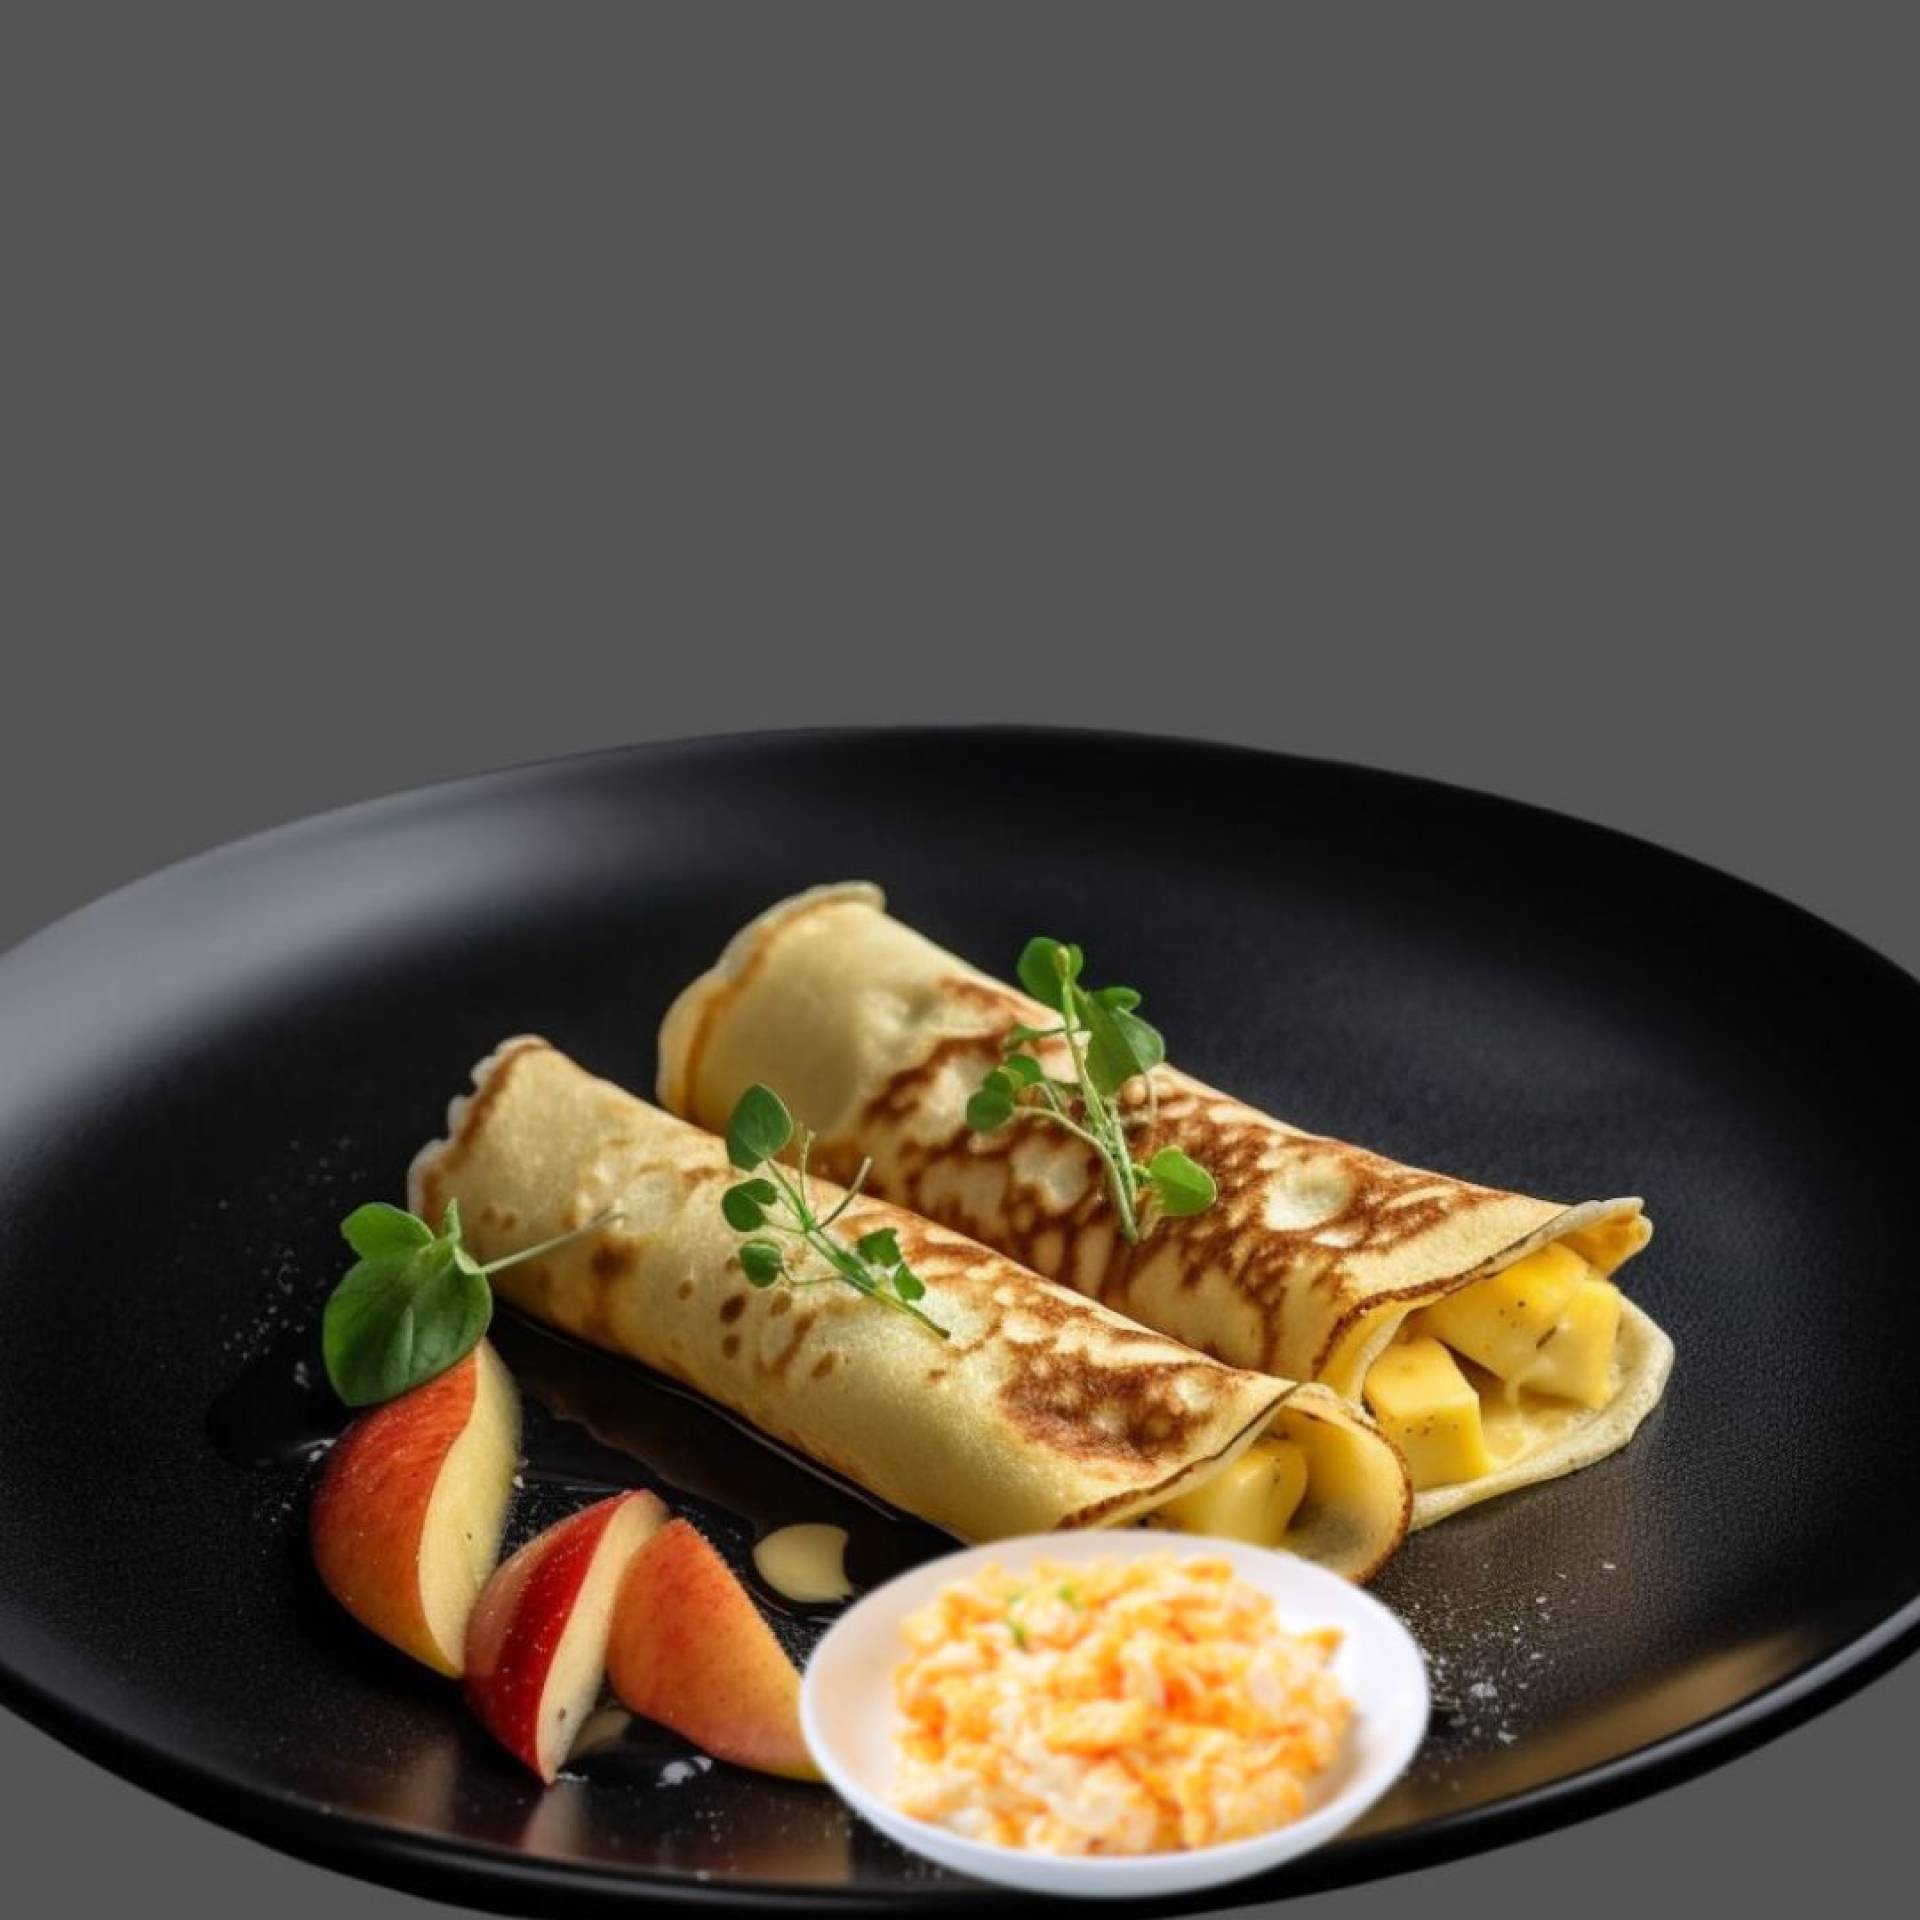 Apple Crepes with Scramble Eggs